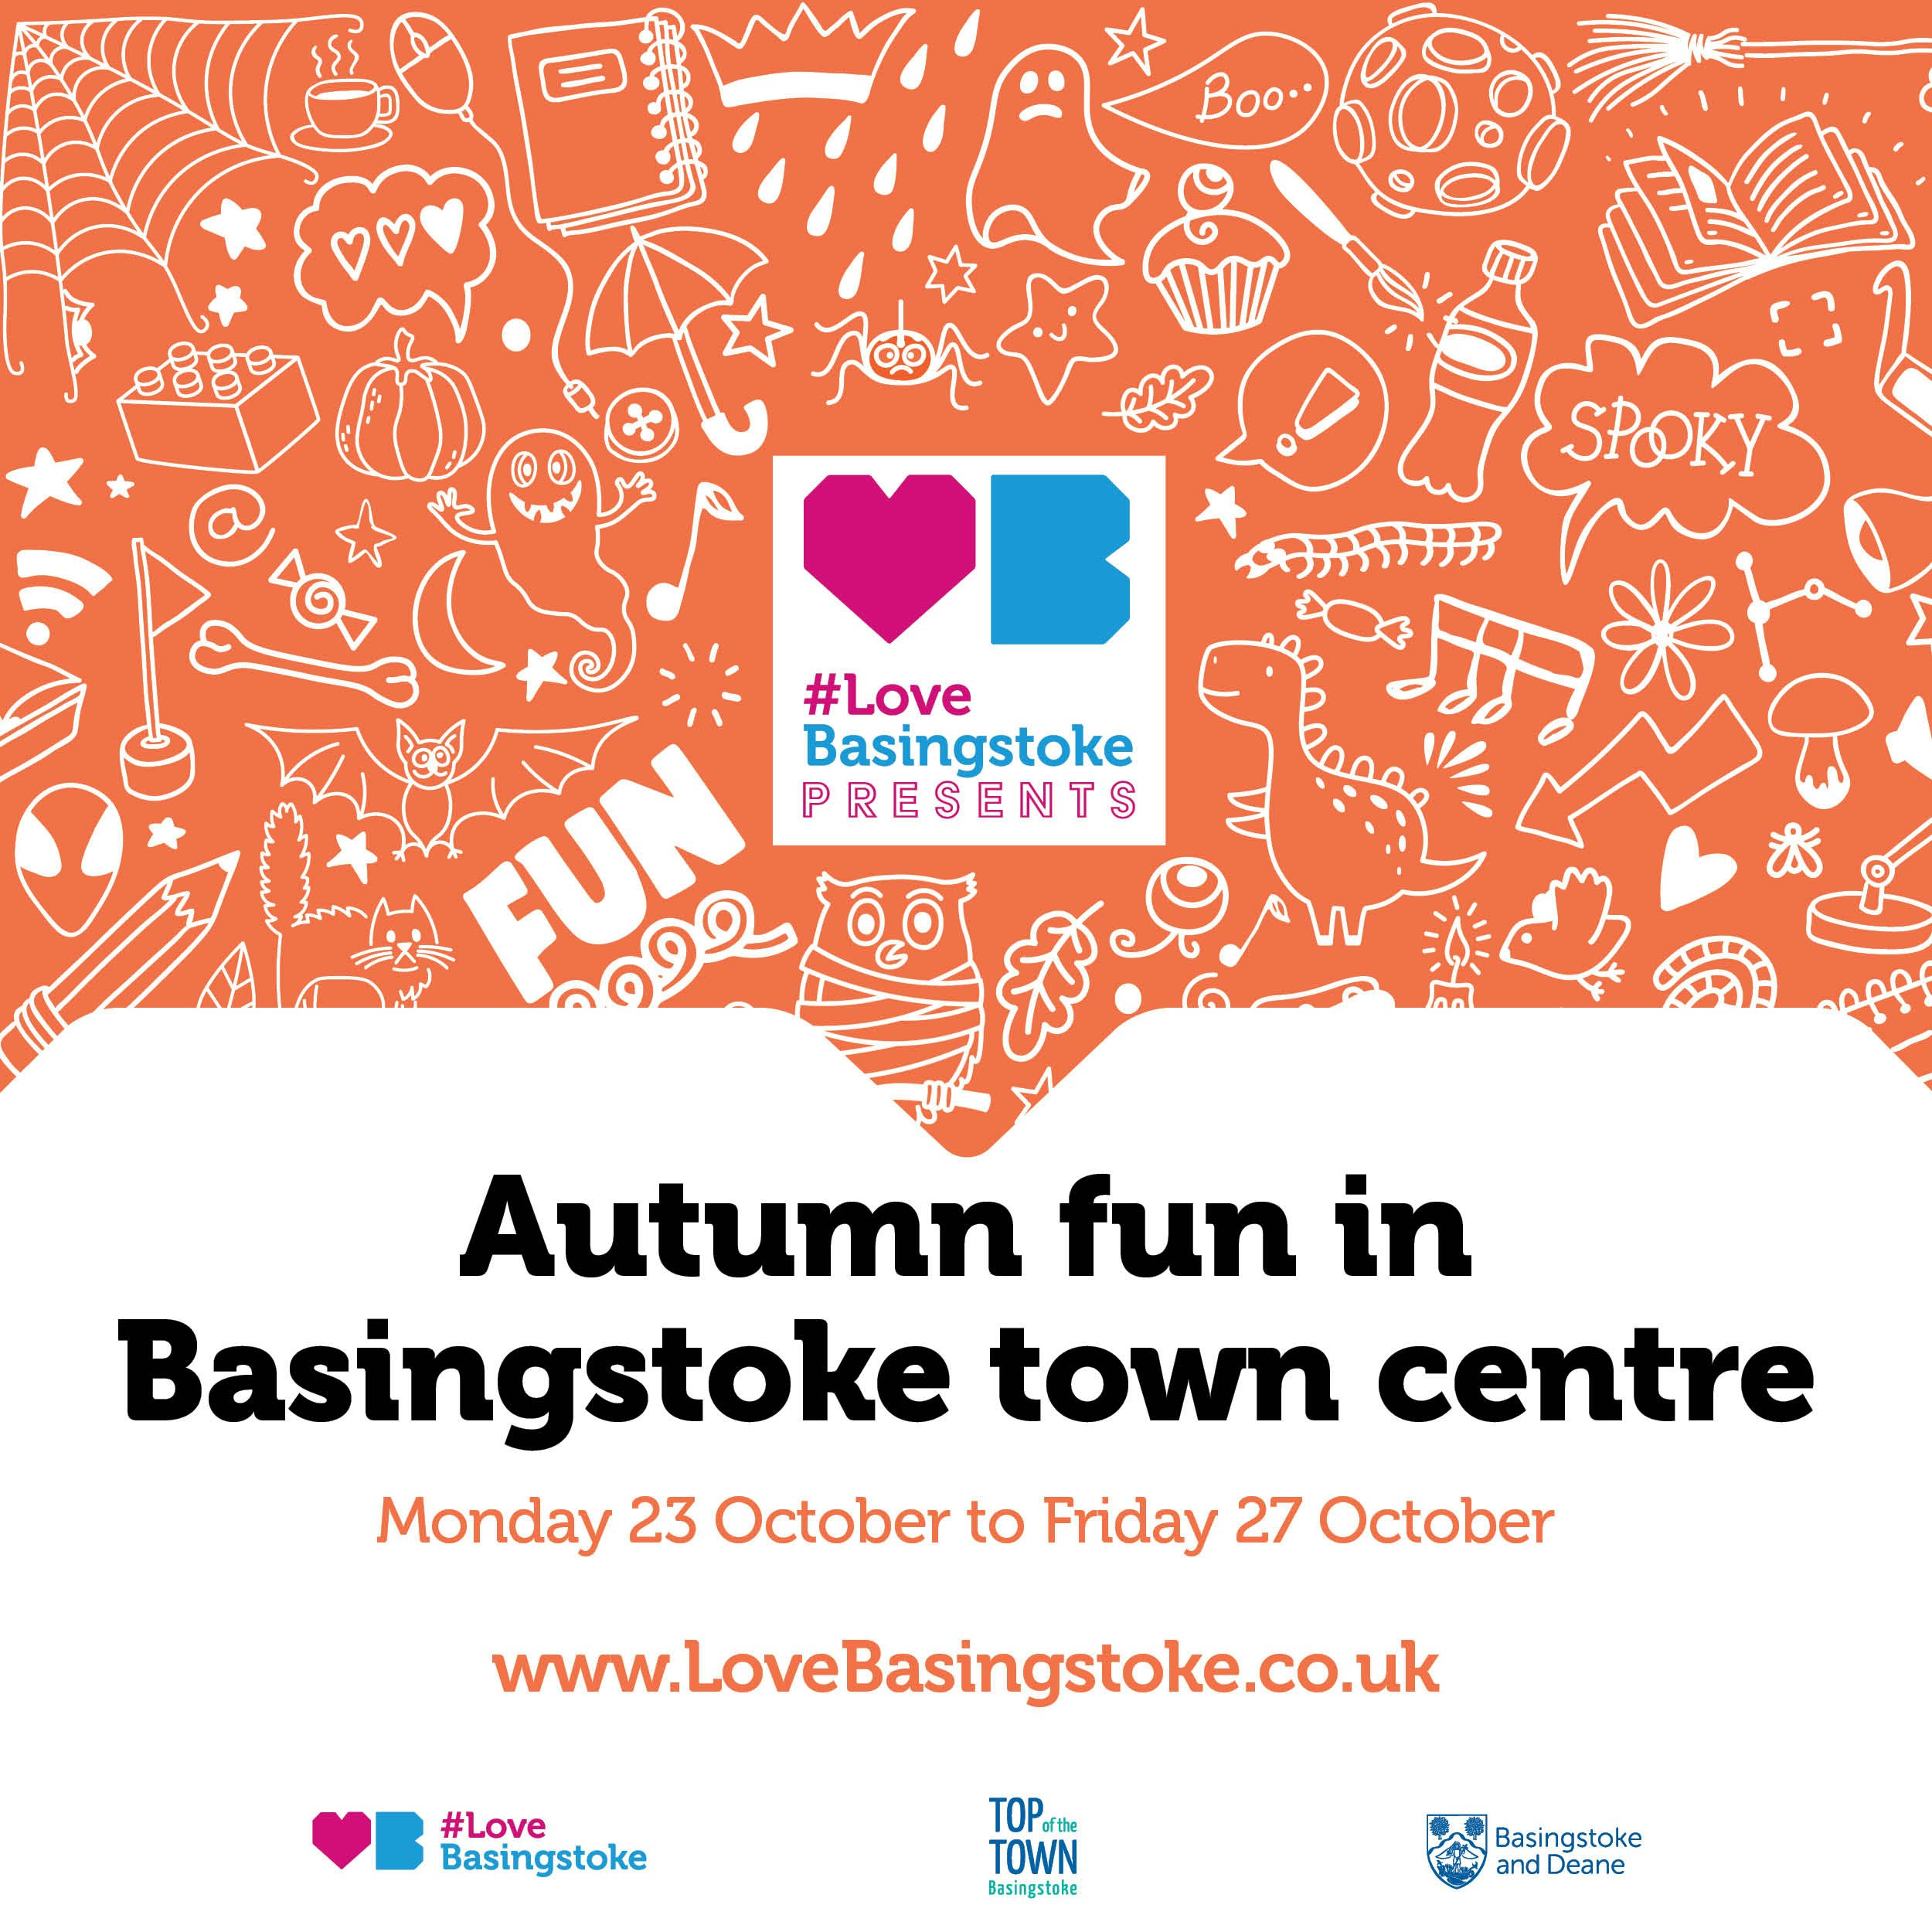 A social card promoting autumn fun in Basingstoke town centre. The top half of the card shows white doodles on top of an orange background.